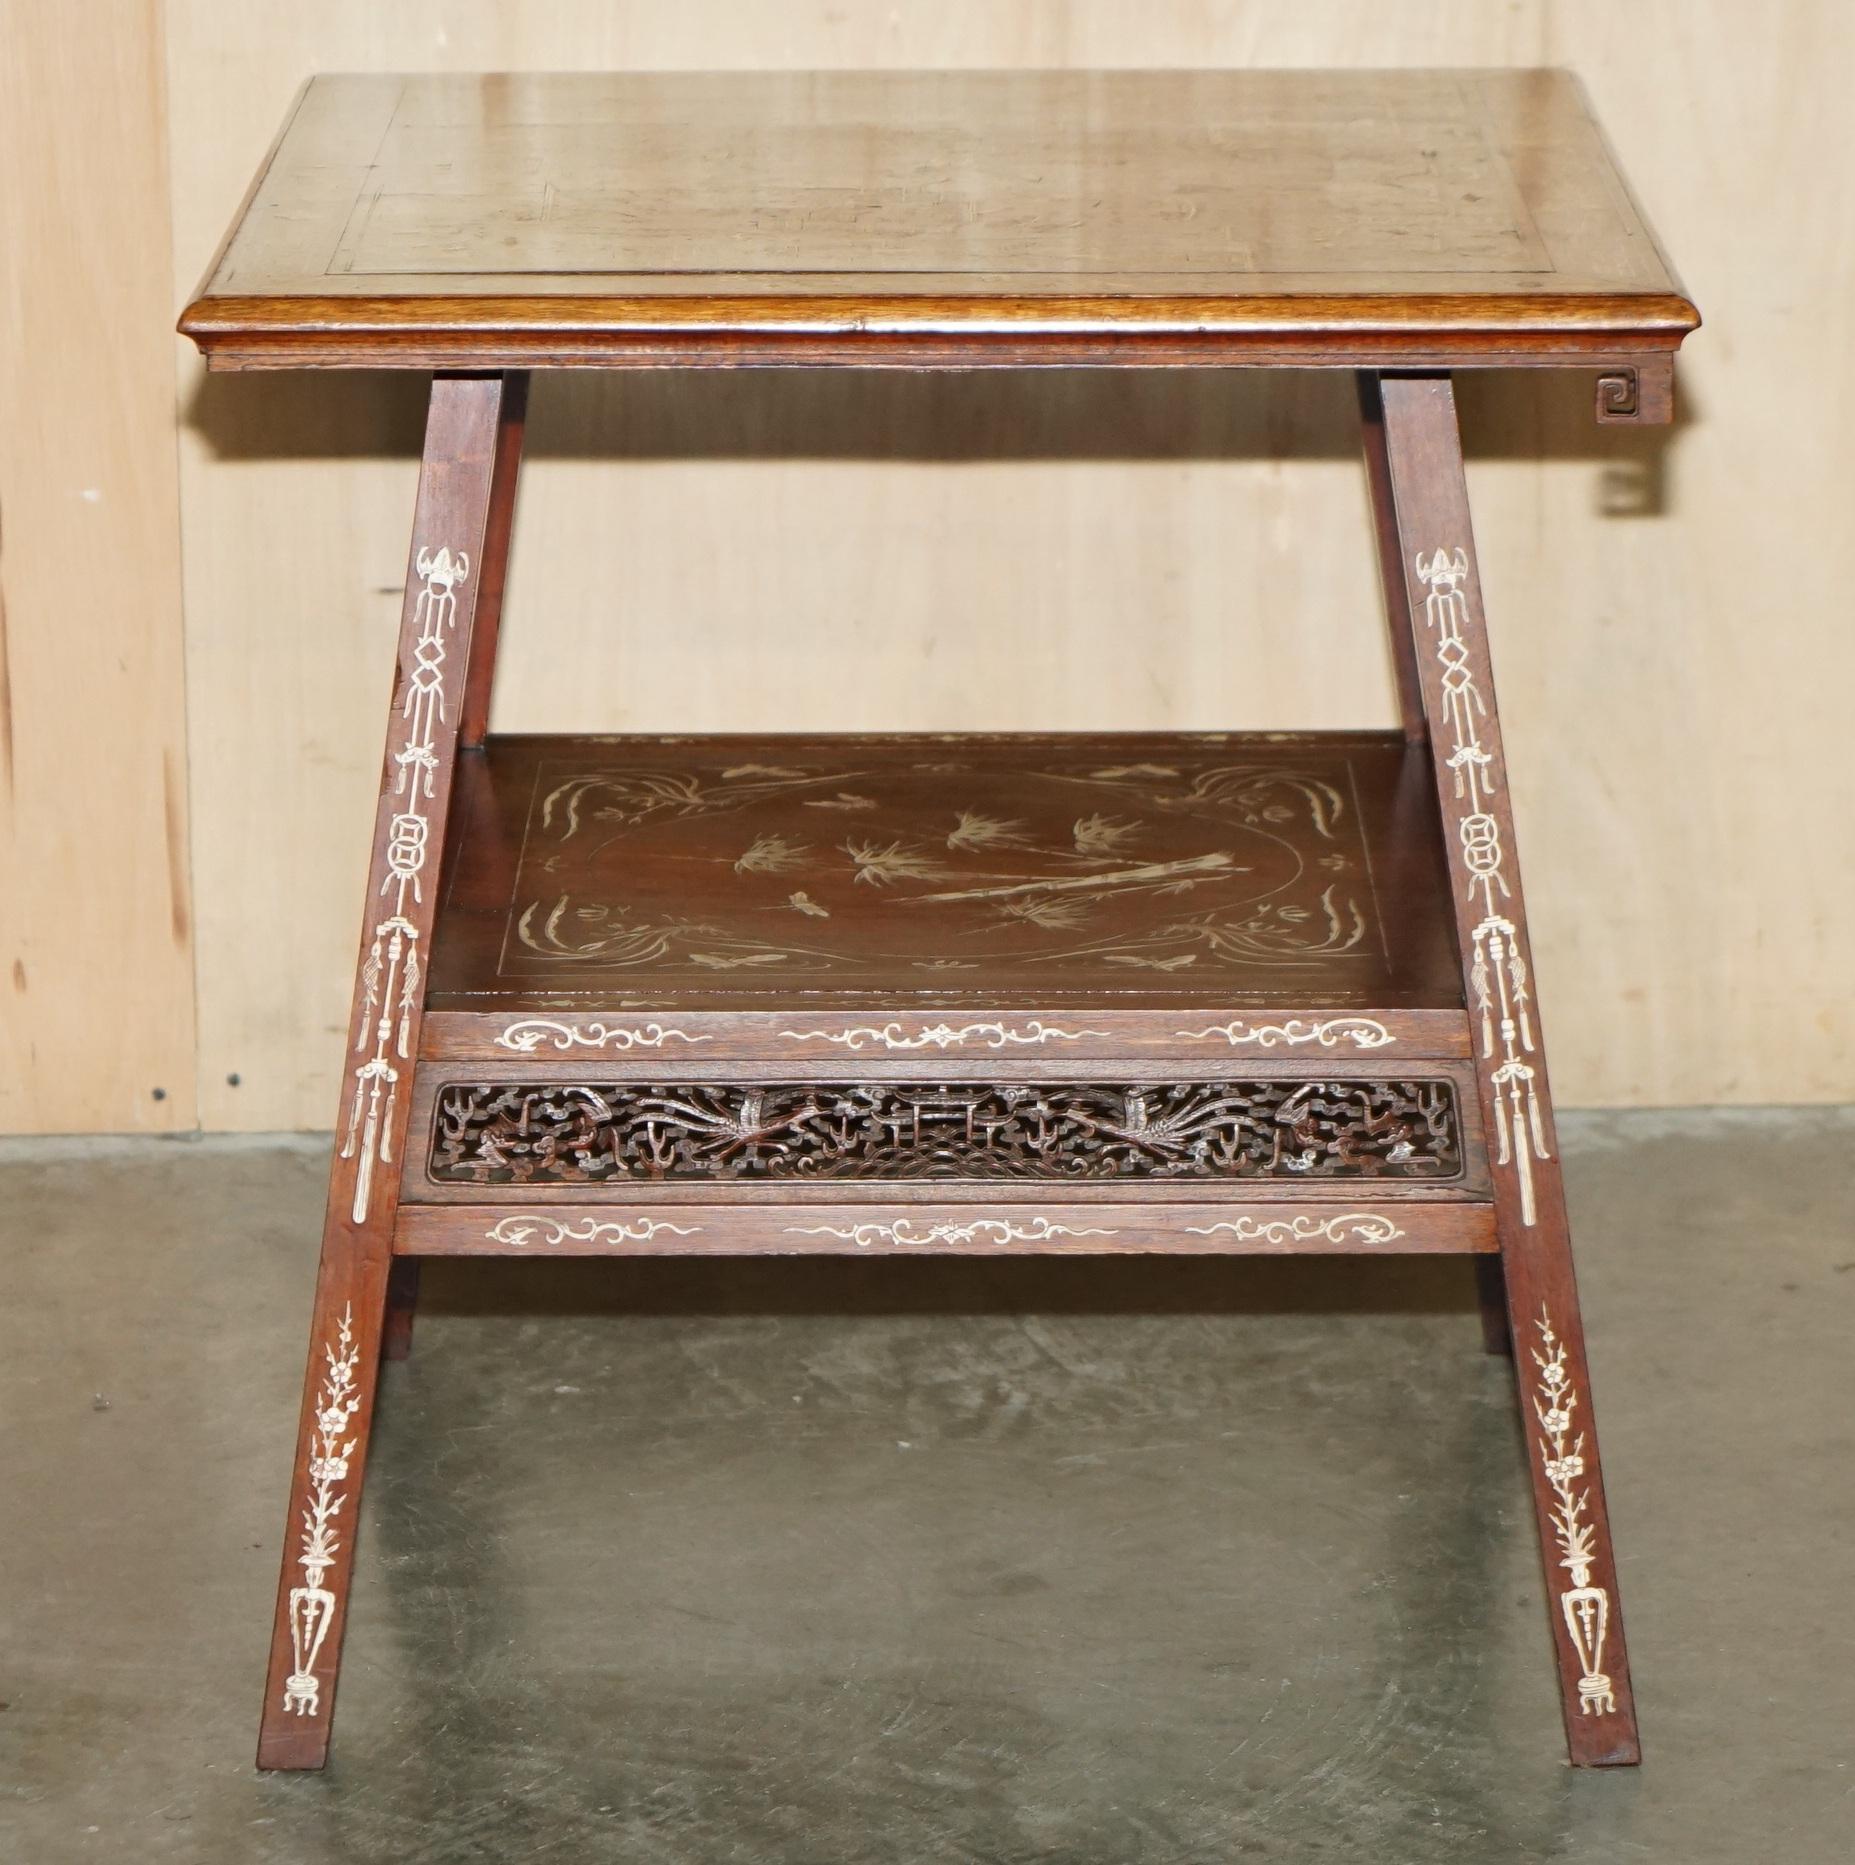 ANTIQUE CIRCA 1900 ORNATELY CARVED AND HEAViLY INLAID CHINESE OCCASIONAL TABLE For Sale 7